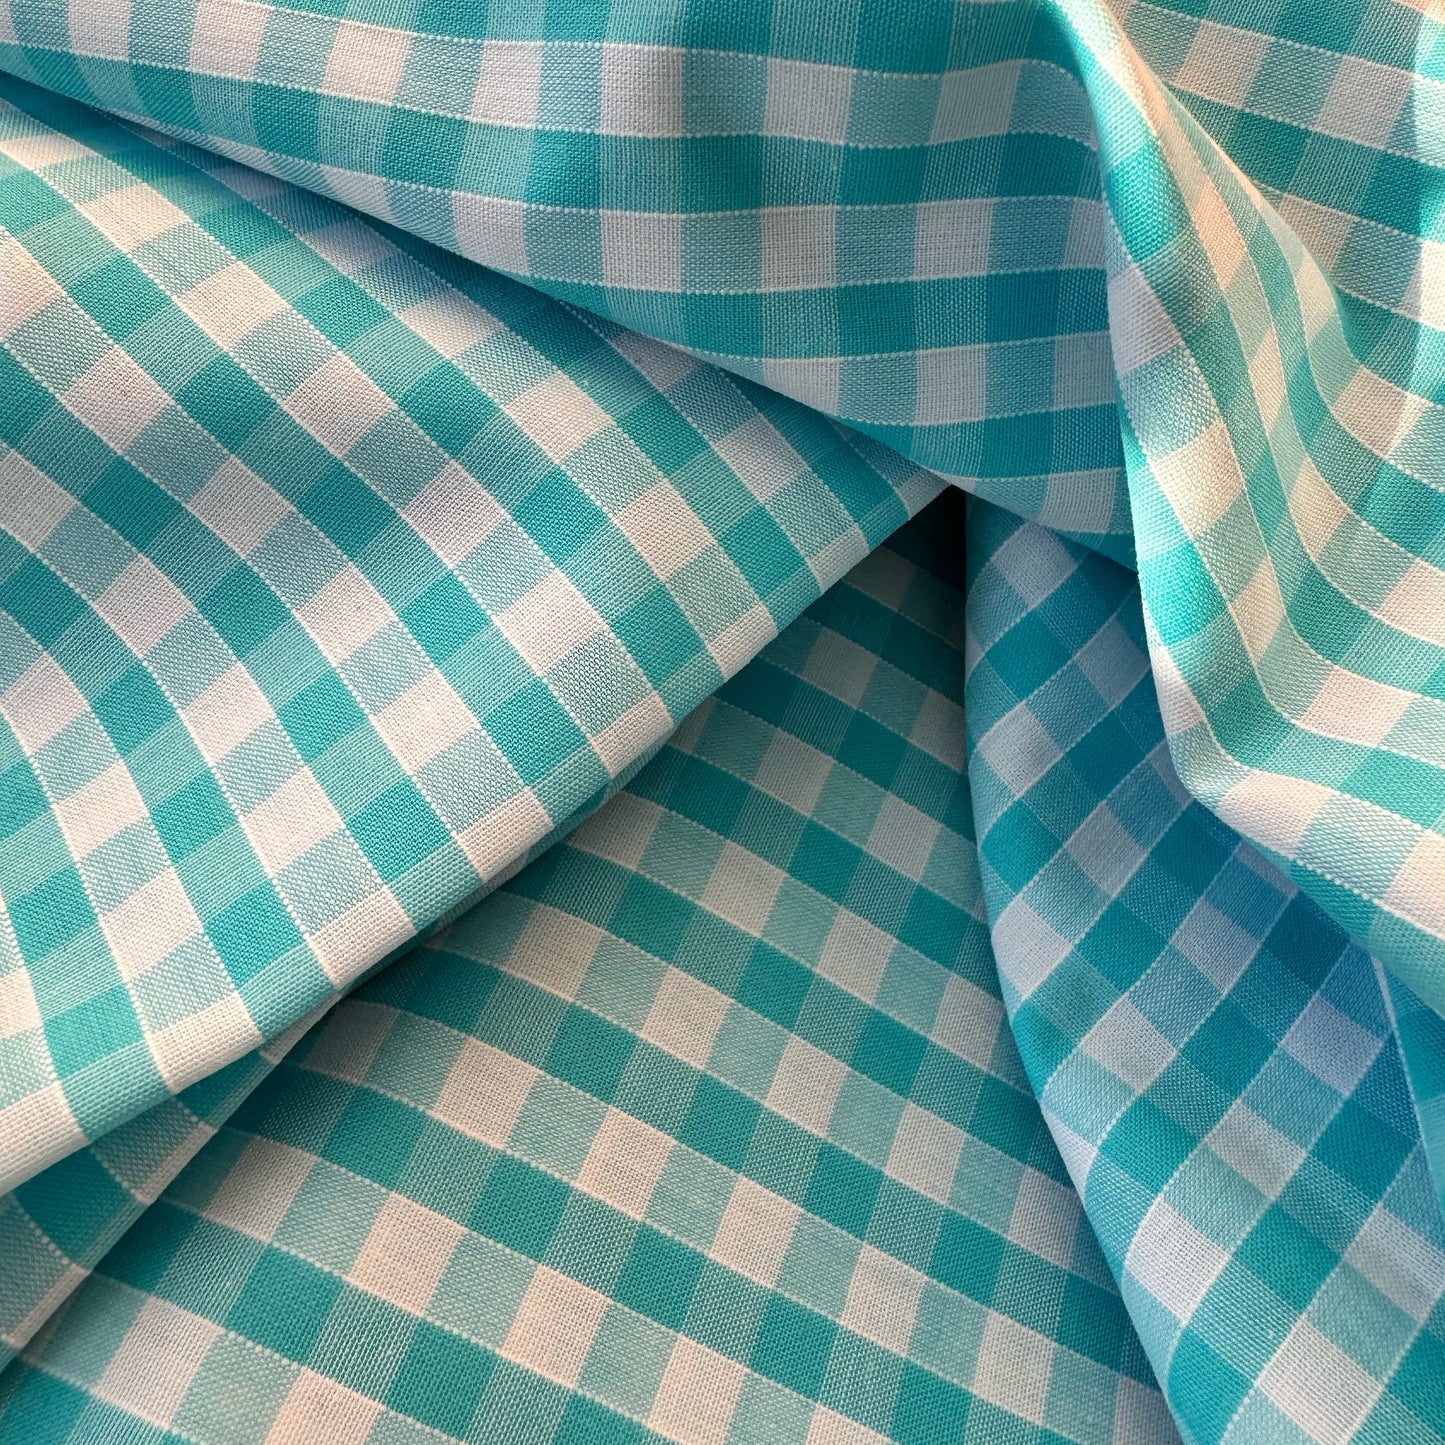 Turquoise Gingham Fabric - Perfect for Bag Lining